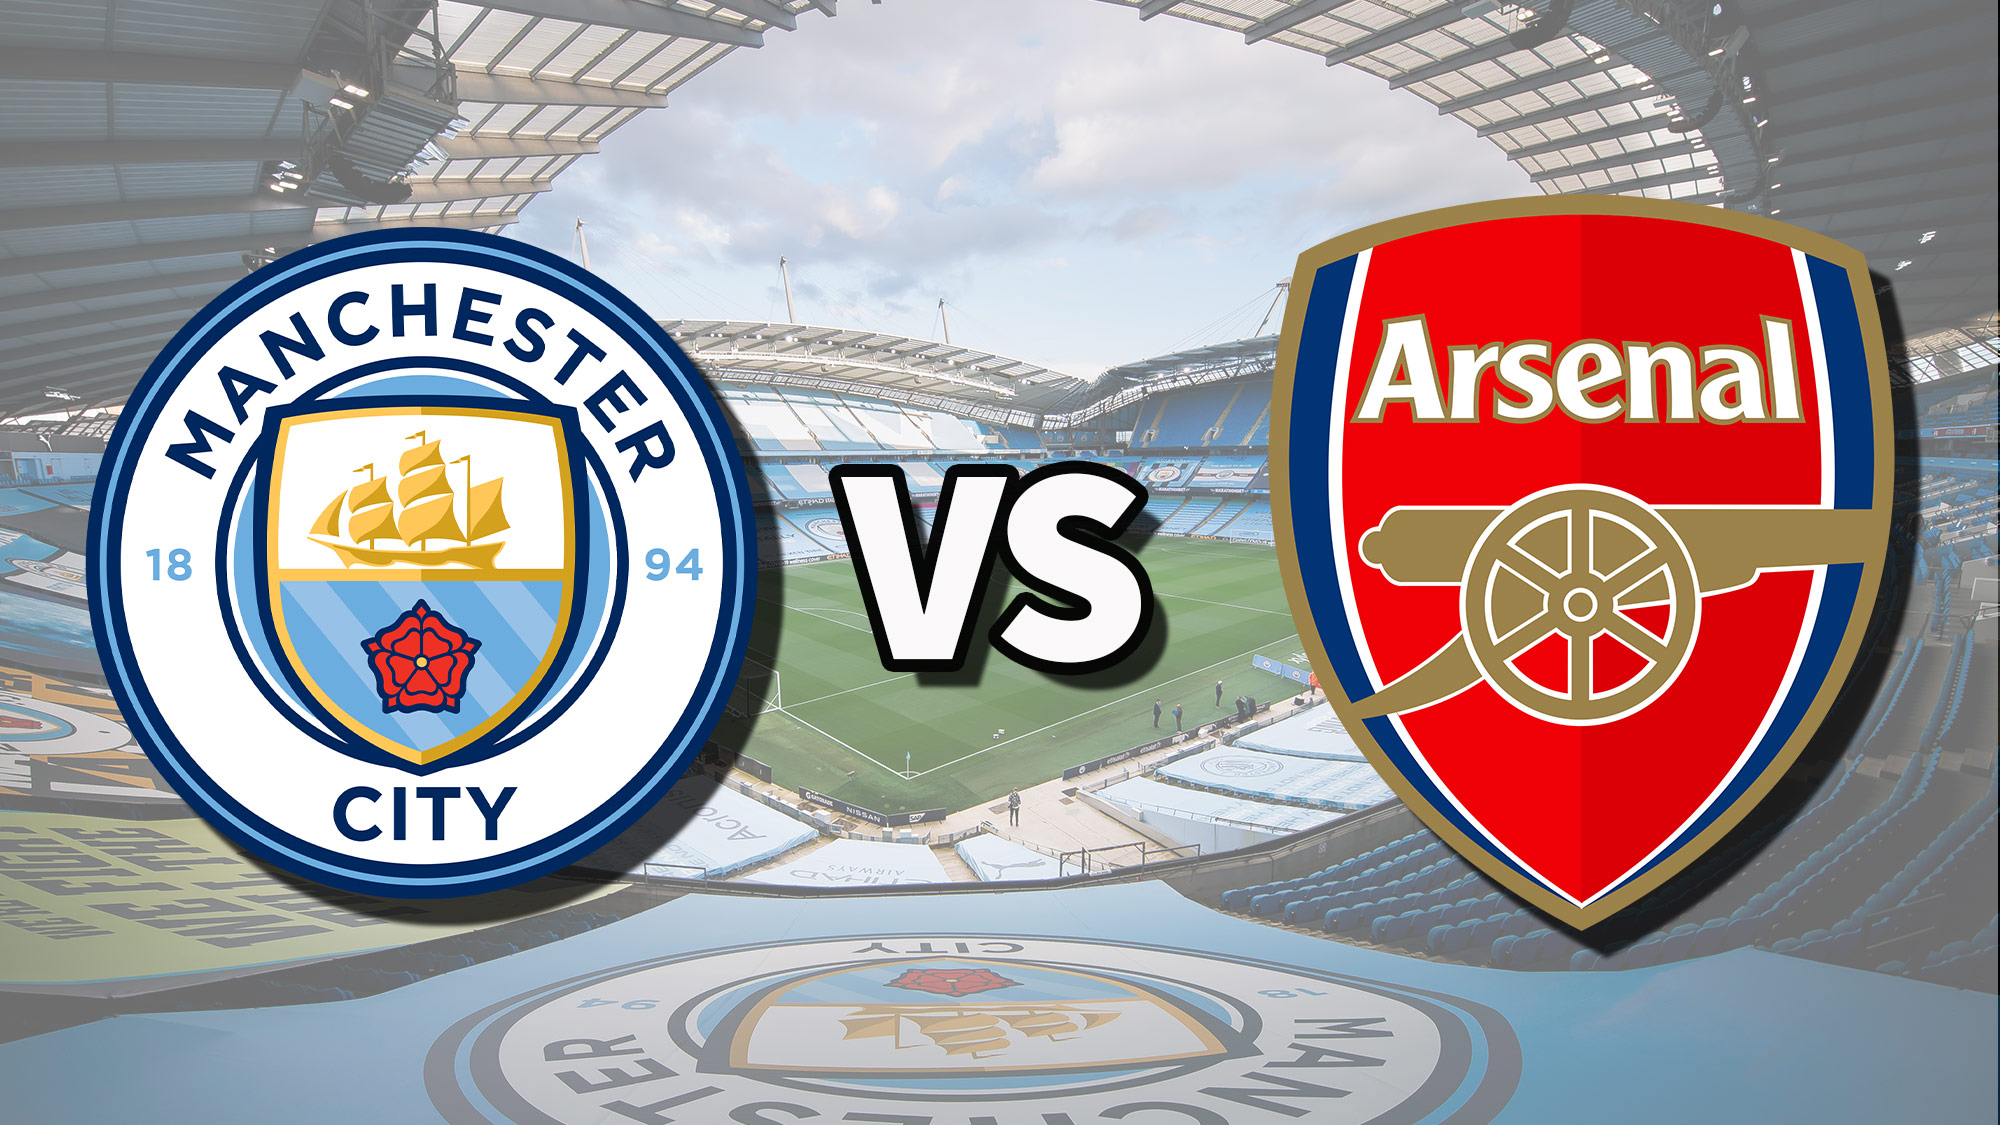 Man City vs Arsenal live stream: How to watch Premier League game online